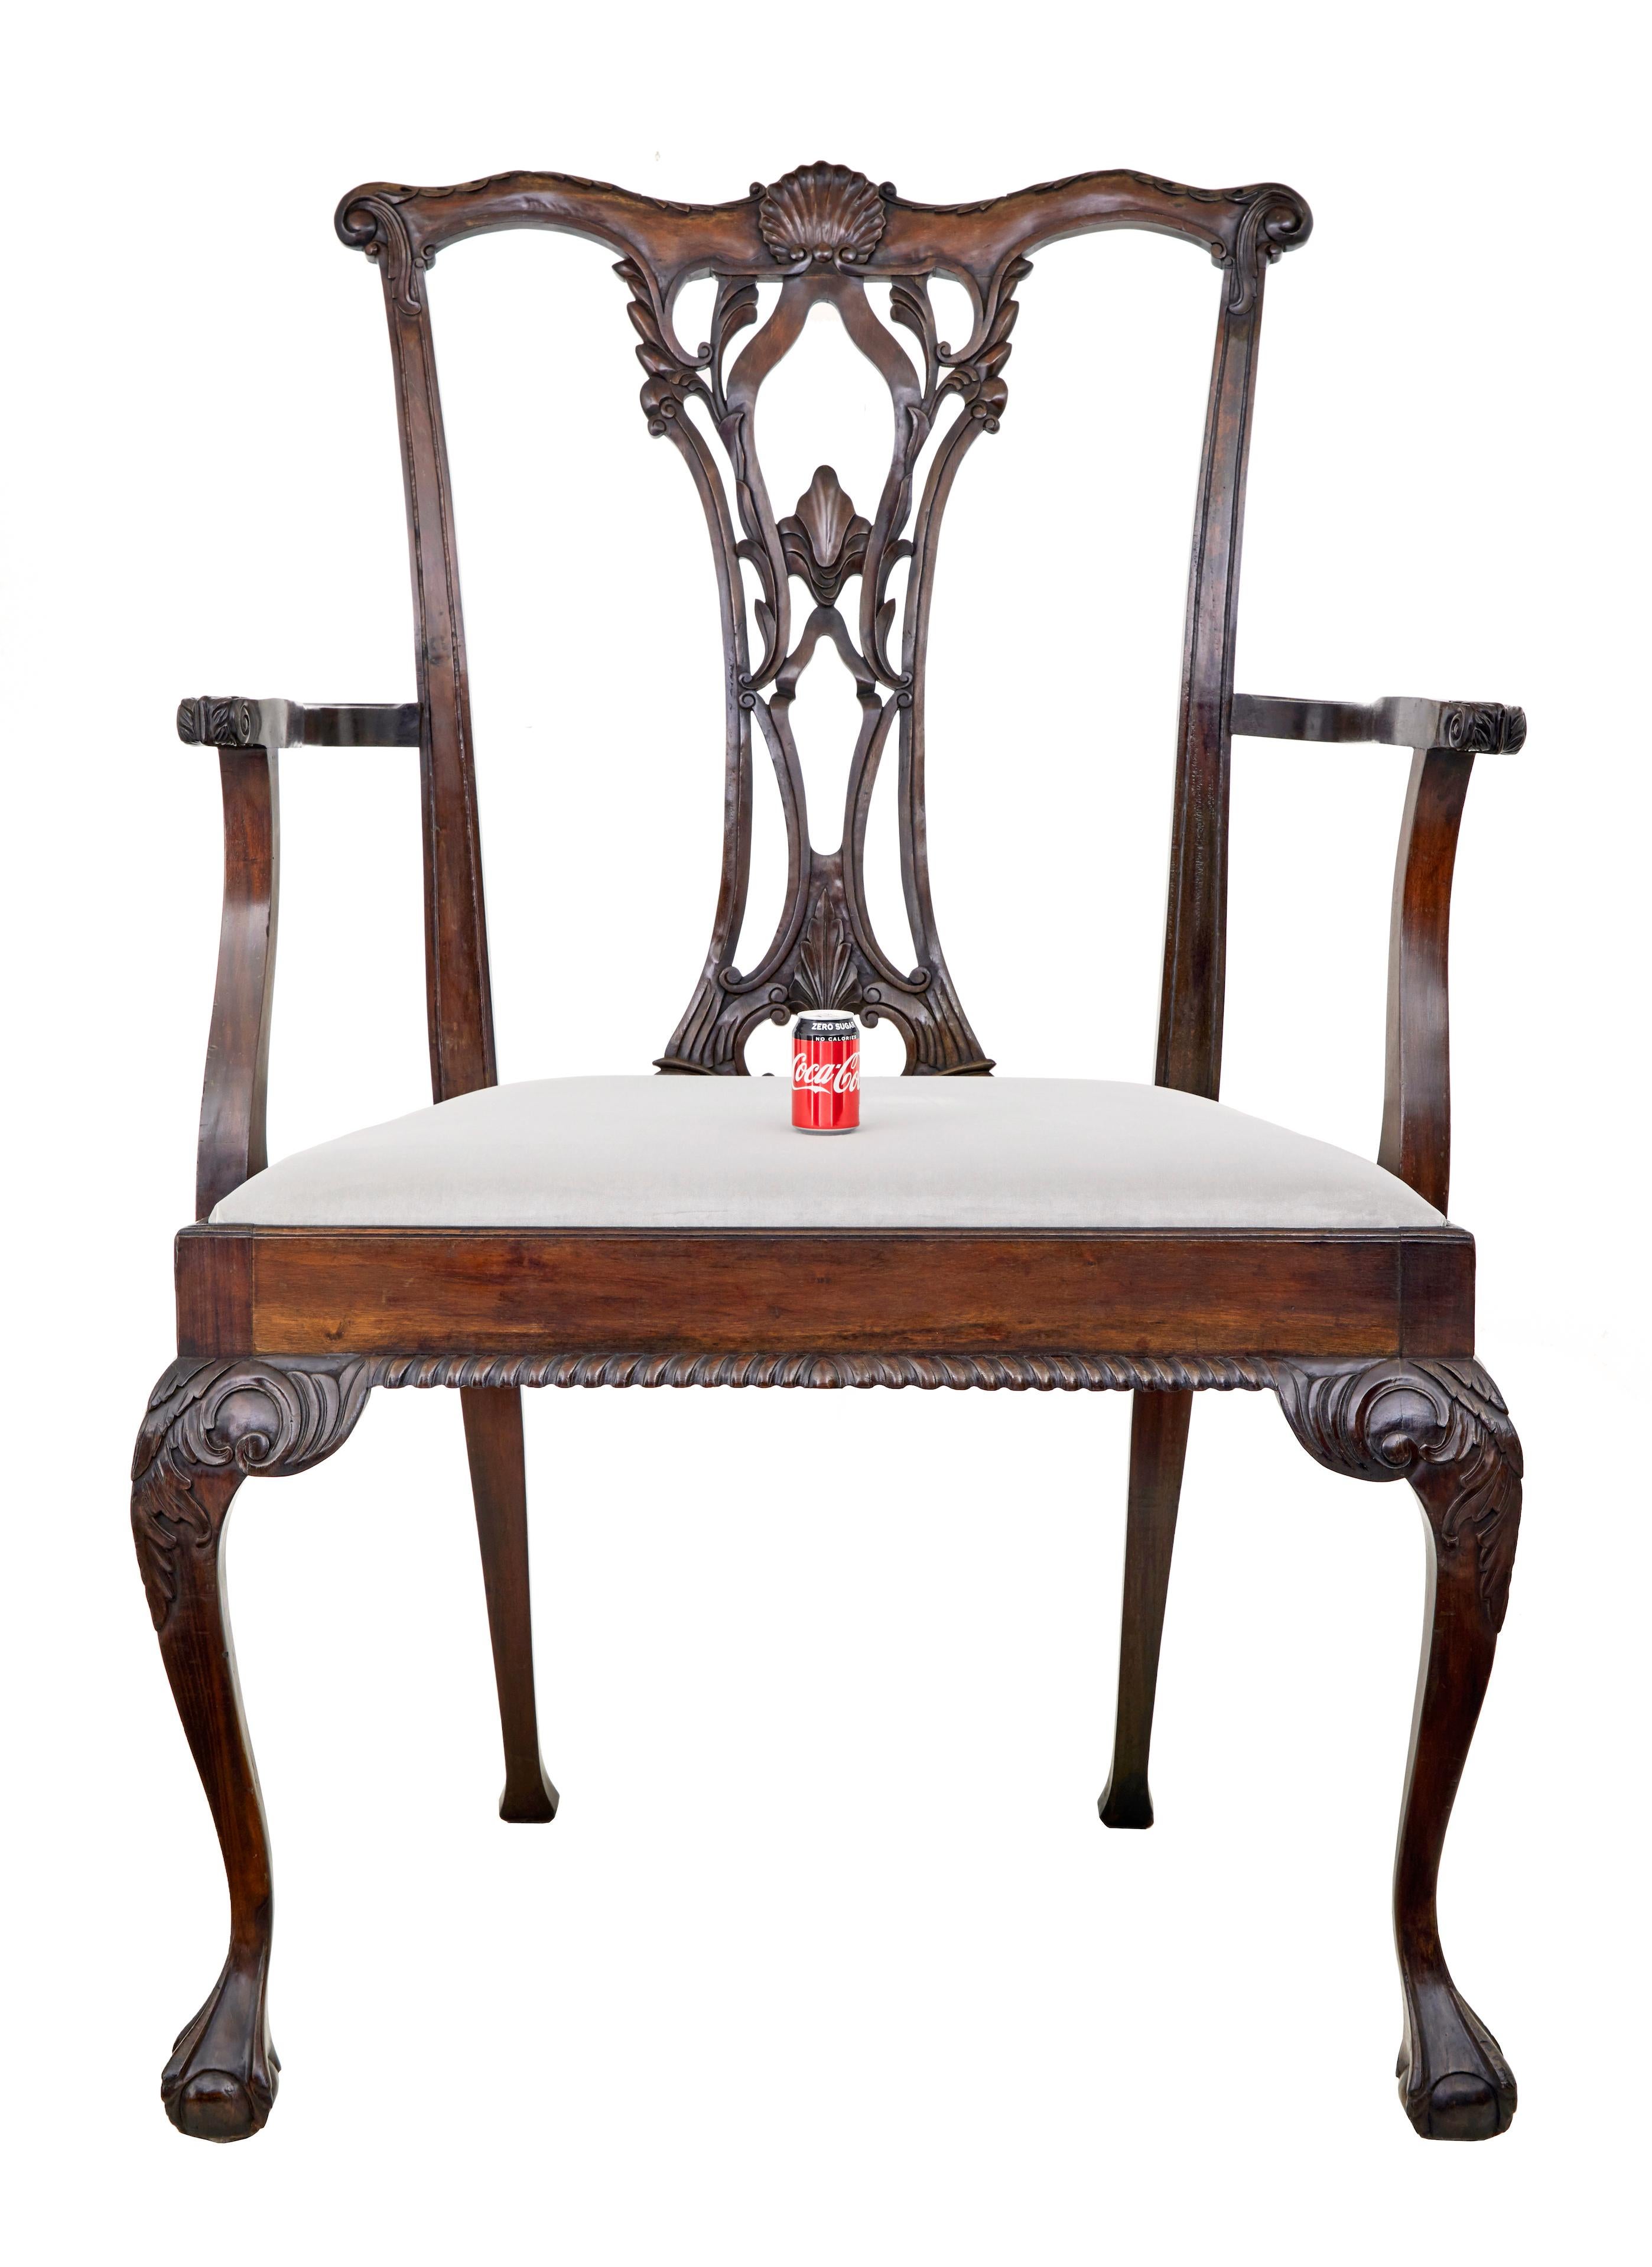 Unusual oversized chippendale style mahogany dining chair for shop display.

Unique opportunity to own this rare decorative chair which was obviously a special commission.  Standing at over 6 feet tall this chair is a fine opportuntiy for a shop